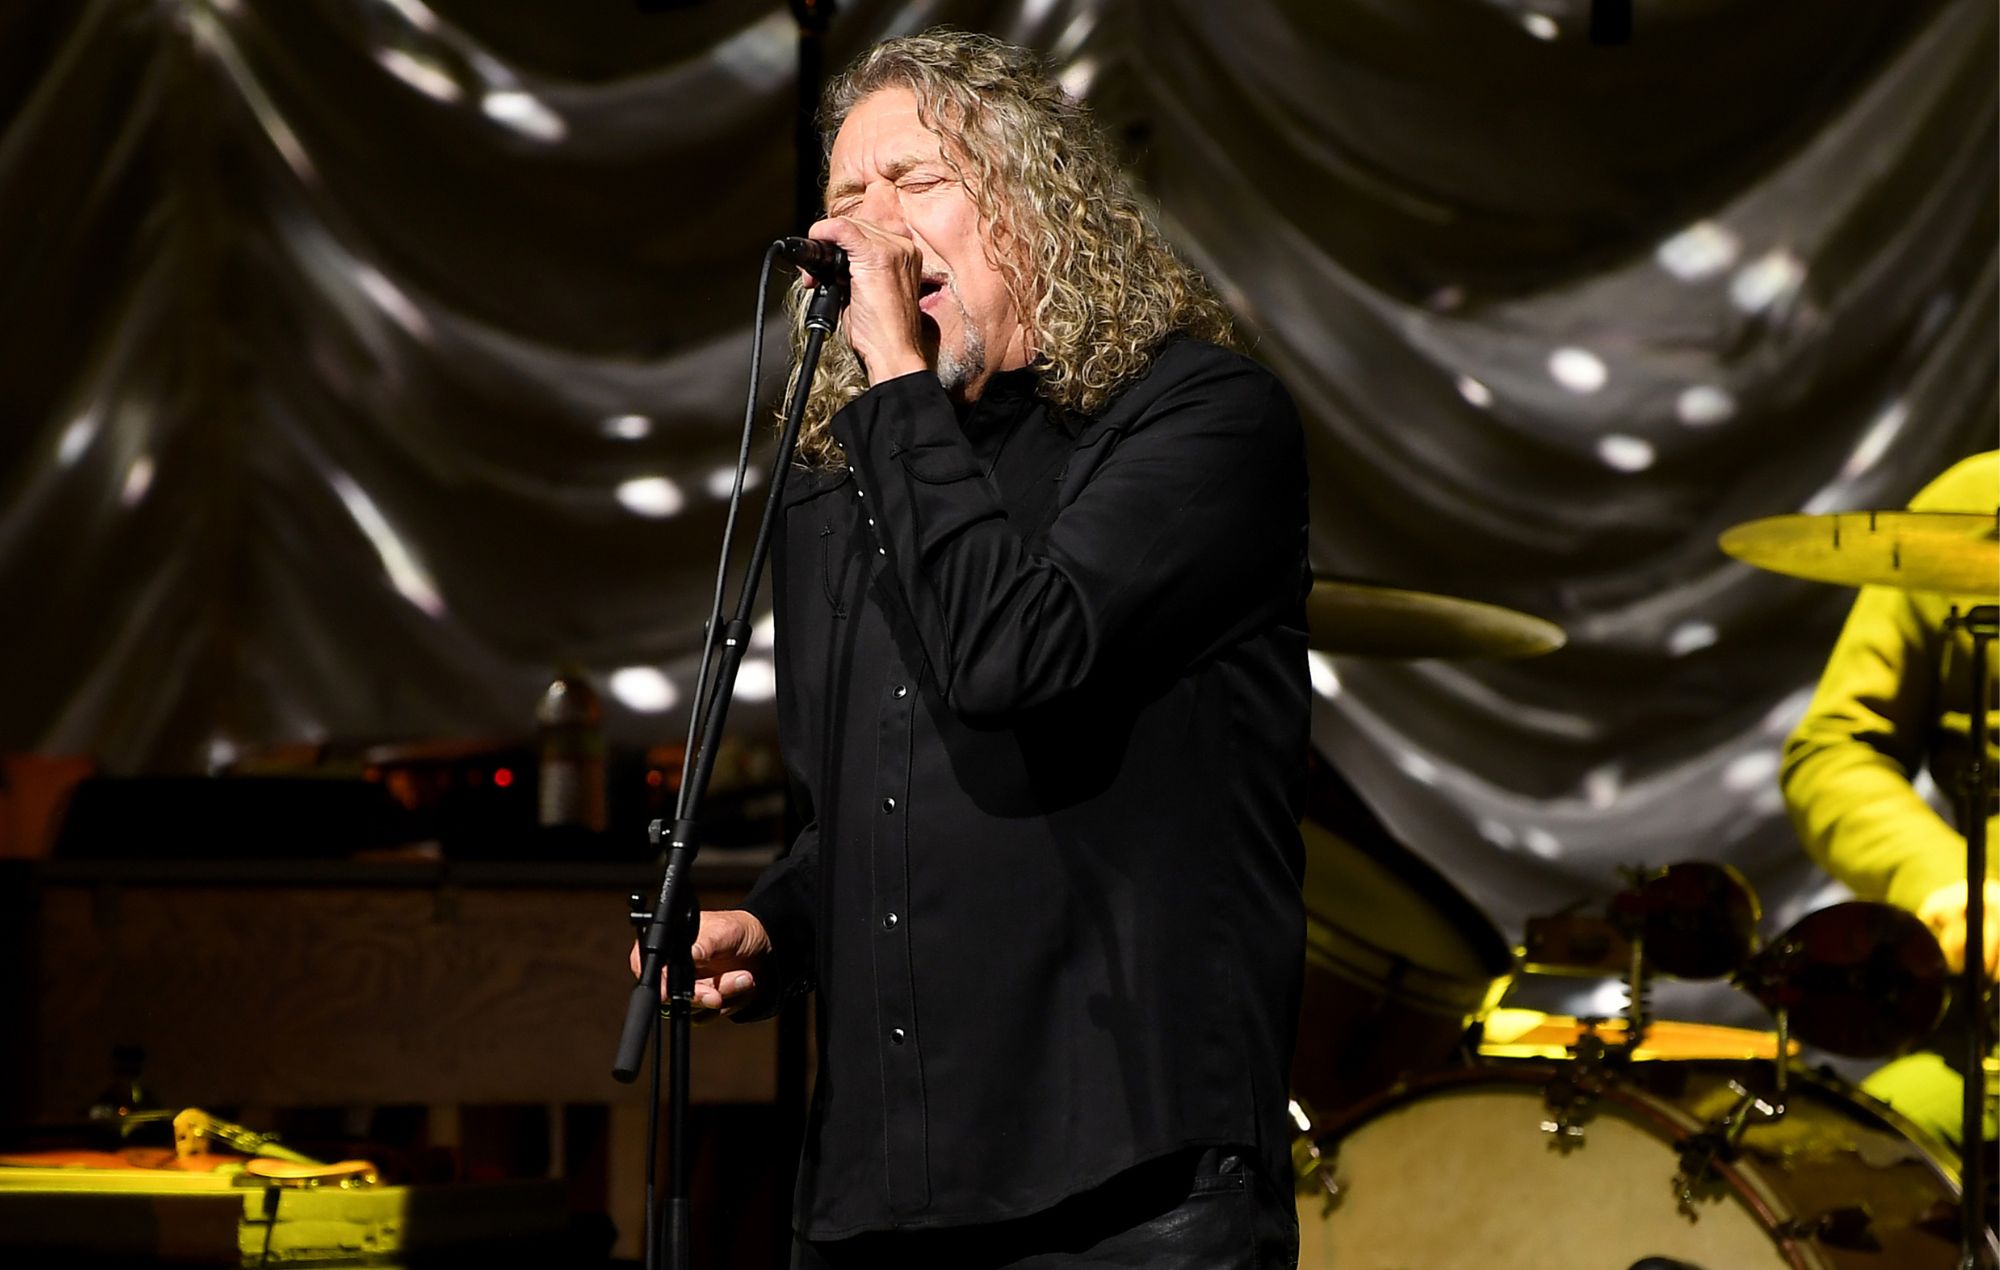 Robert Plant performed Led Zeppelin’s ‘Stairway To Heaven’ after fan donated “six-figure sum” for charity